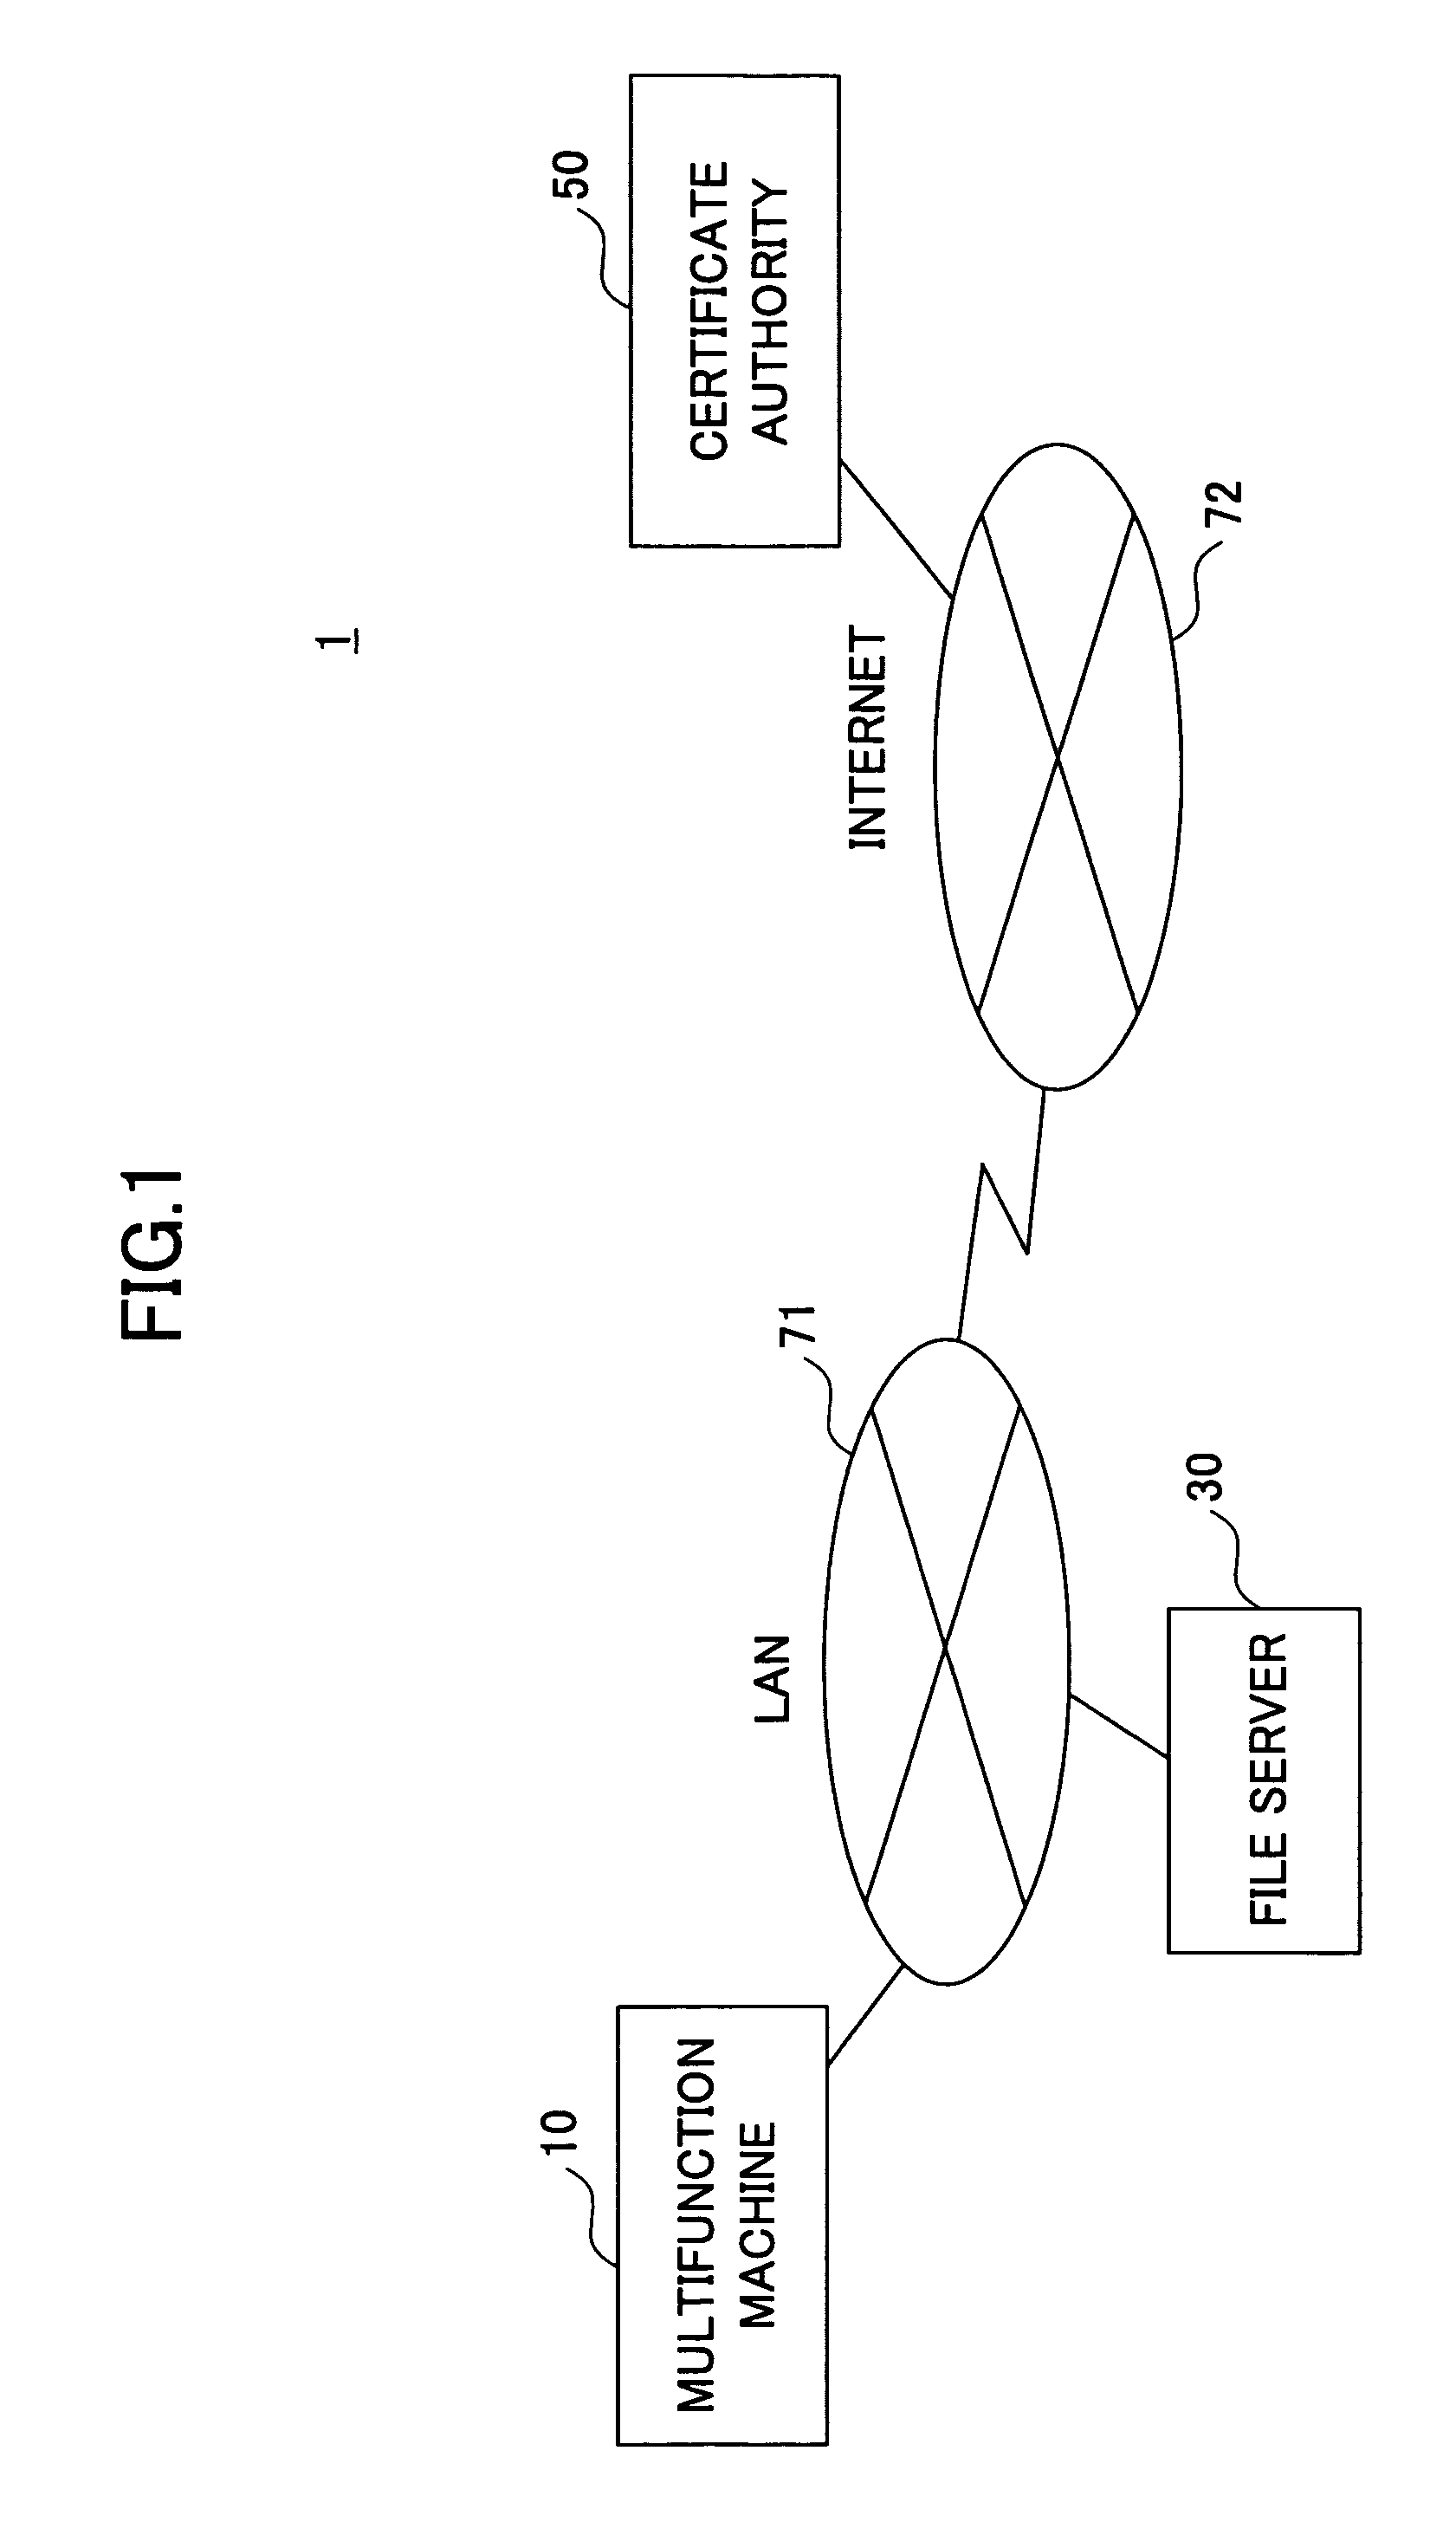 Image forming apparatus for generating electronic signature